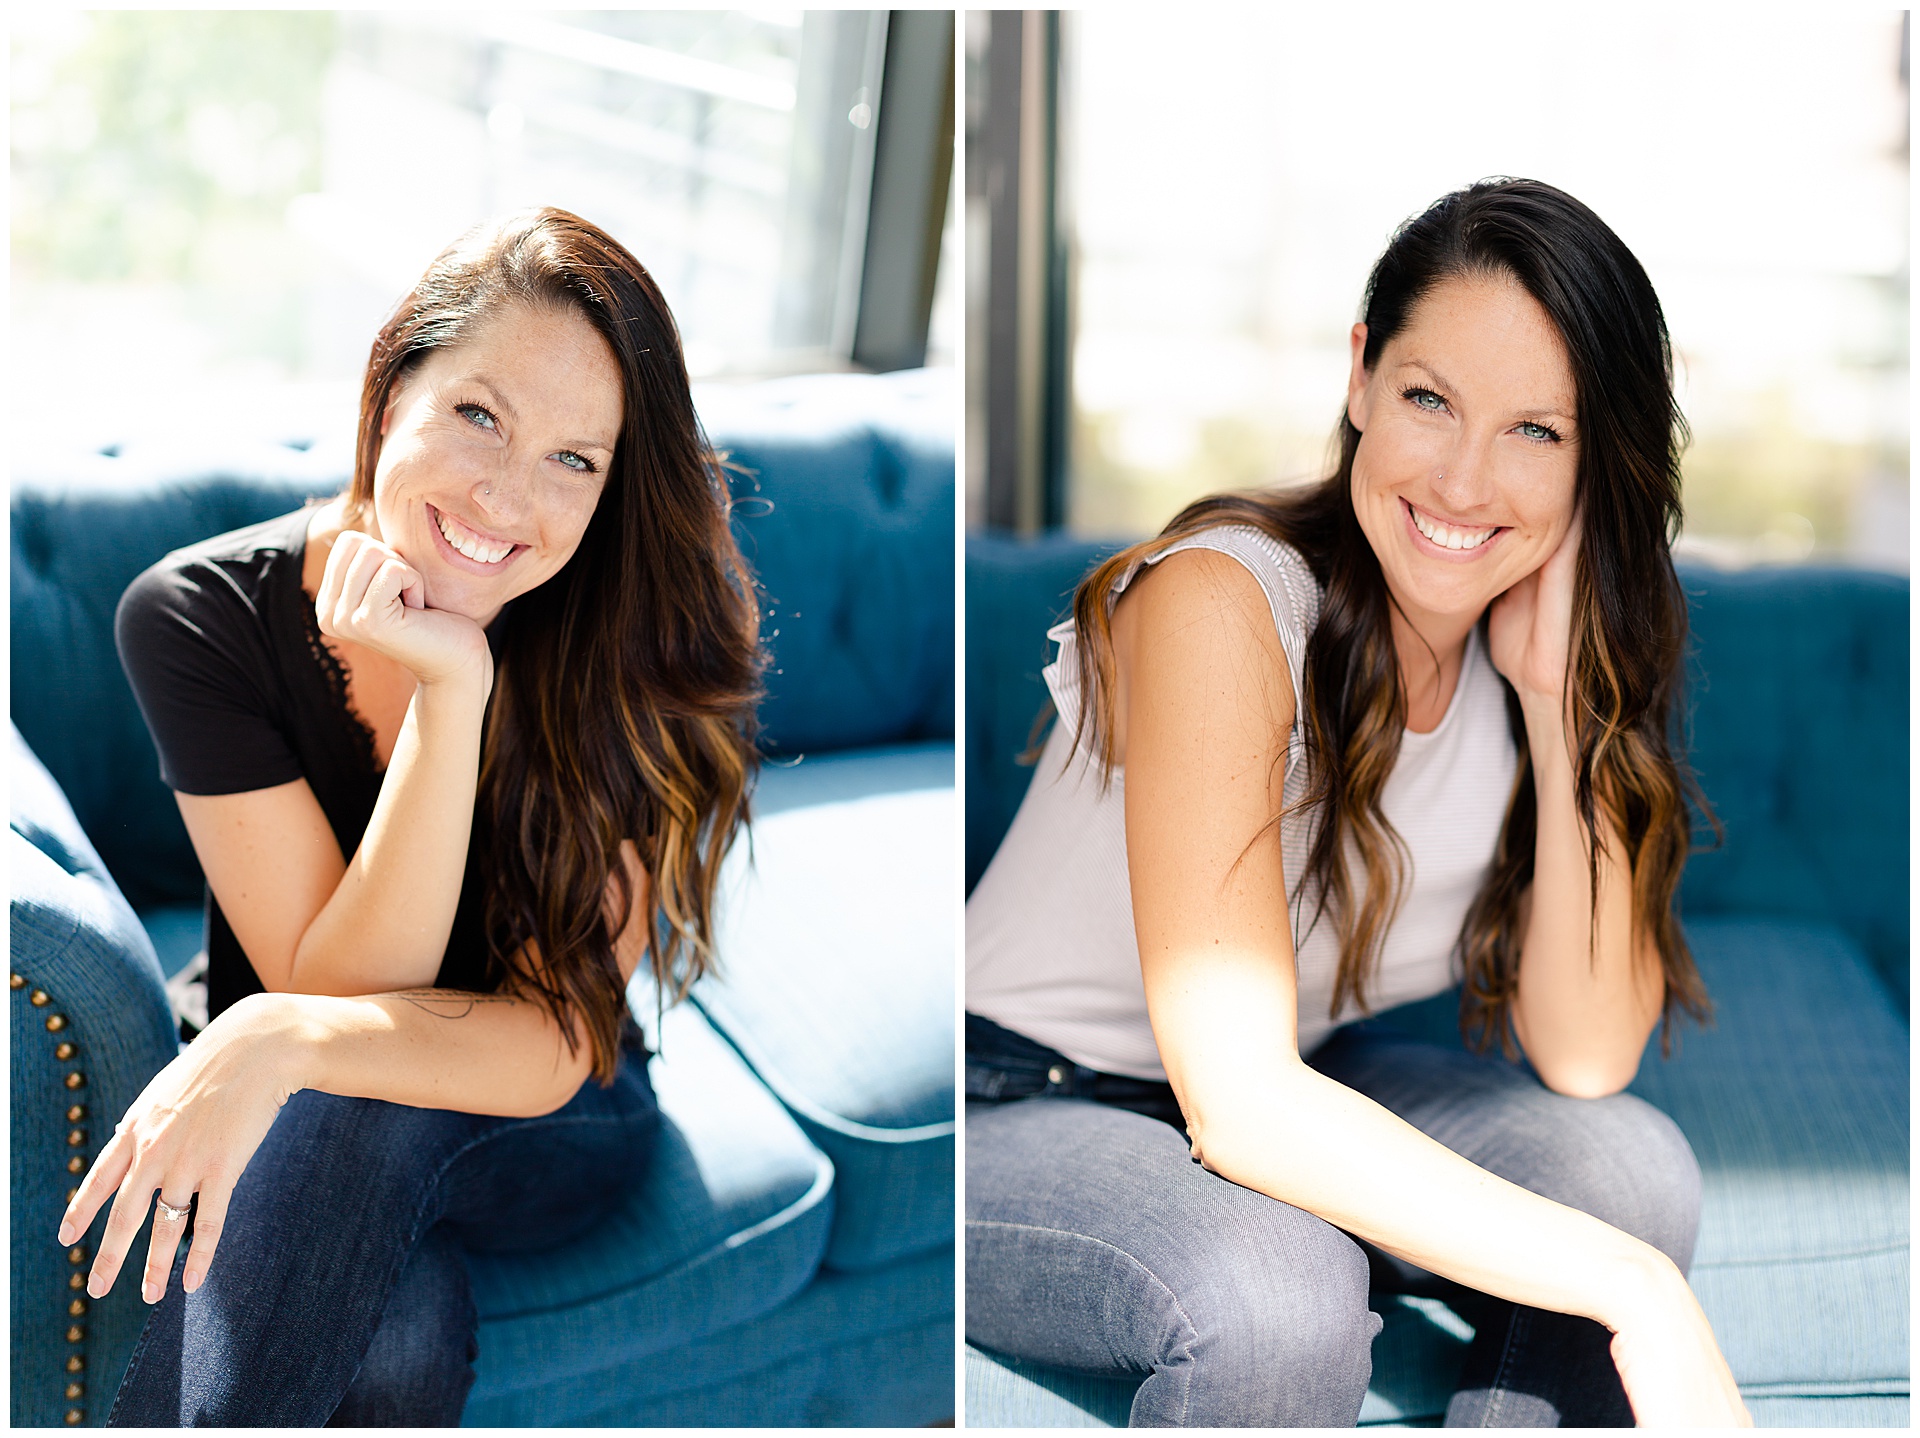 Business Headshots, Beautiful Branding Portrait Profile Images by Nicole Brown Photography